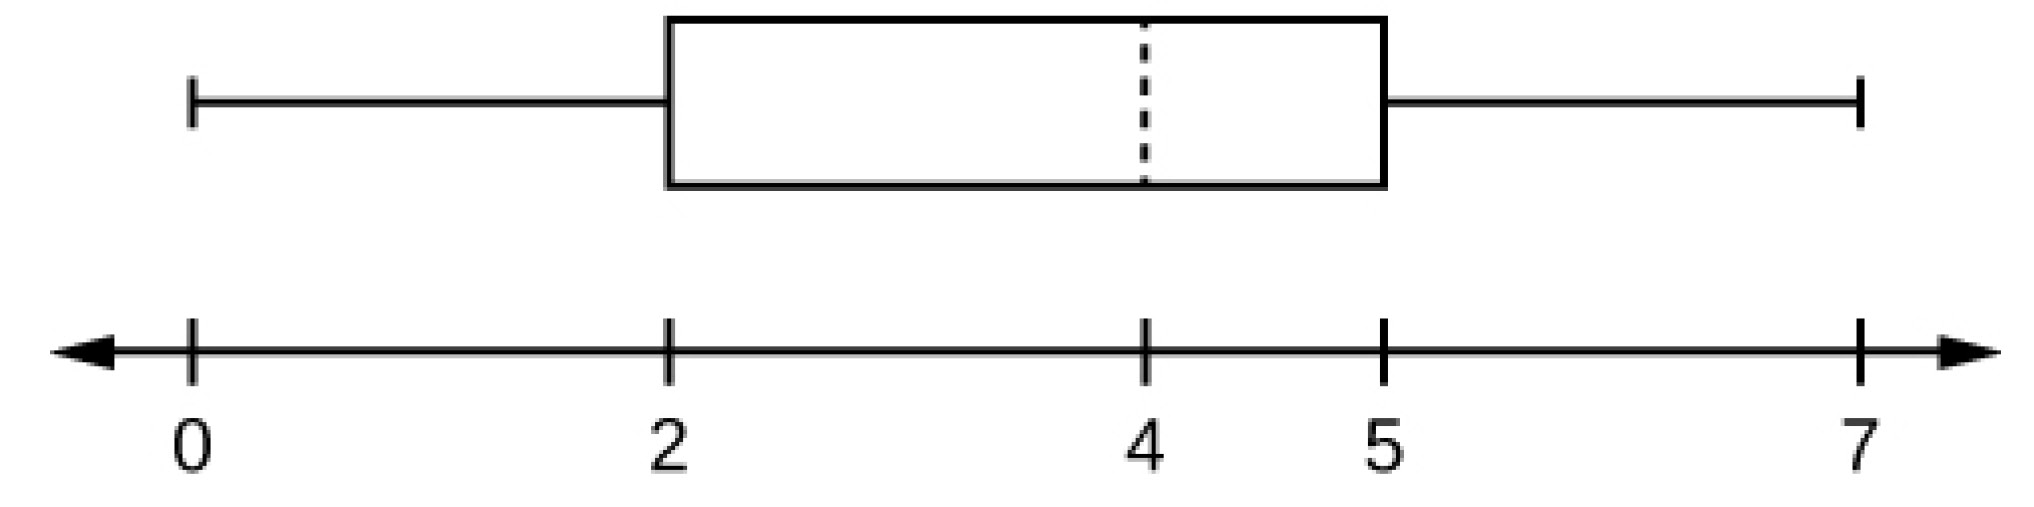 This is a boxplot over a number line from 0 to 7. The left whisker ranges from minimum, 0, to lower quartile, 2. The box runs from lower quartile, 2, to upper quartile, 5. A dashed line marks the median at 4. The right whisker runs from 5 to maximum value 7.